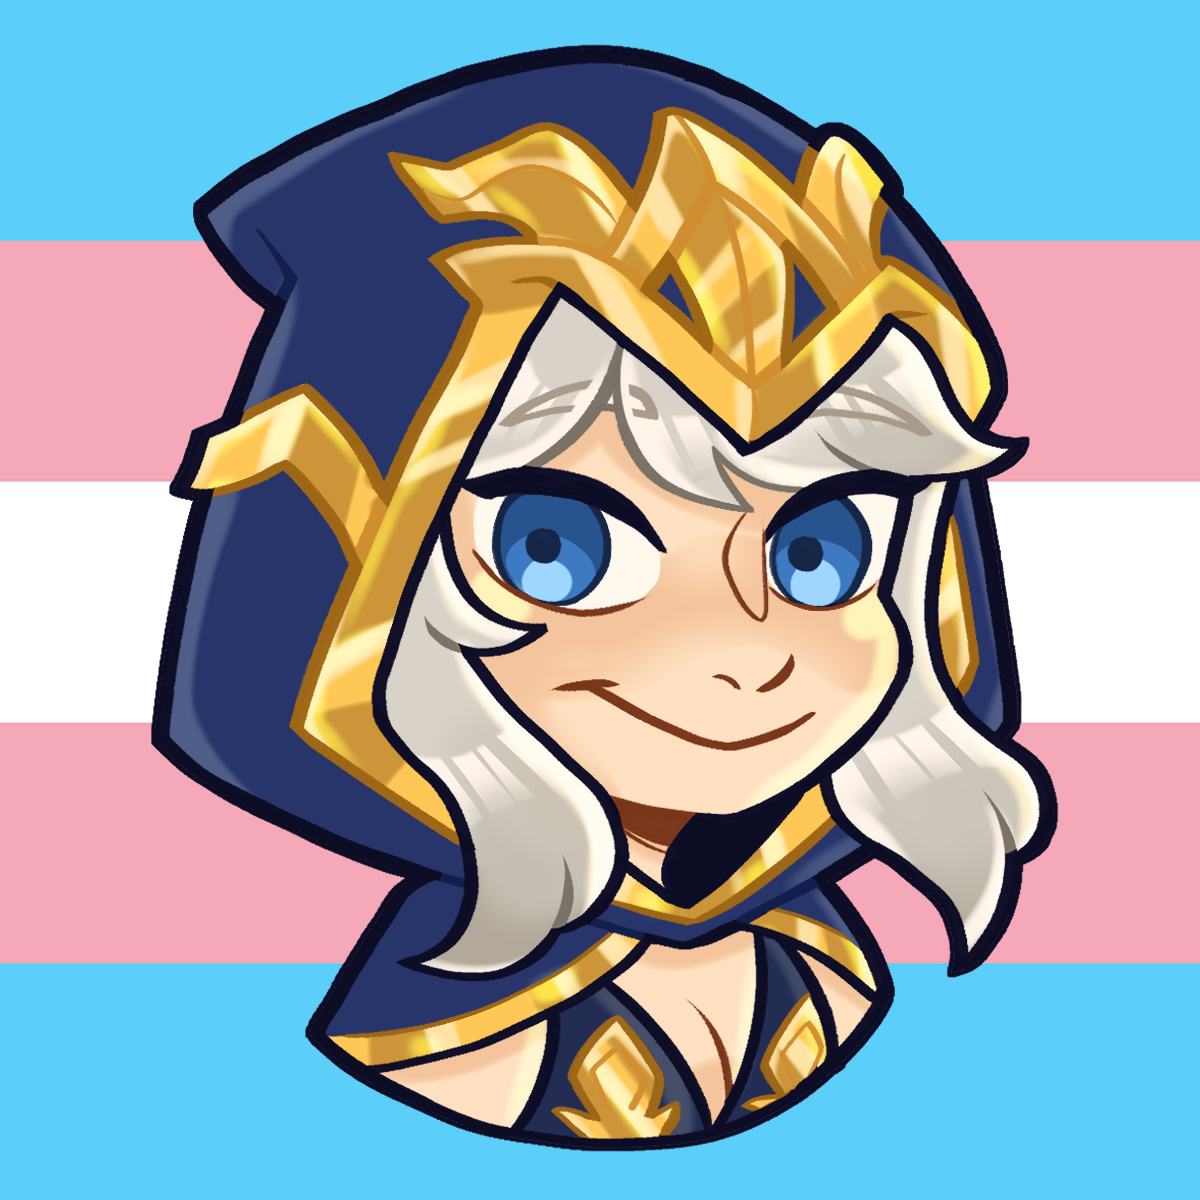 fraxiinus avatar, cartoon character with transgender flag background